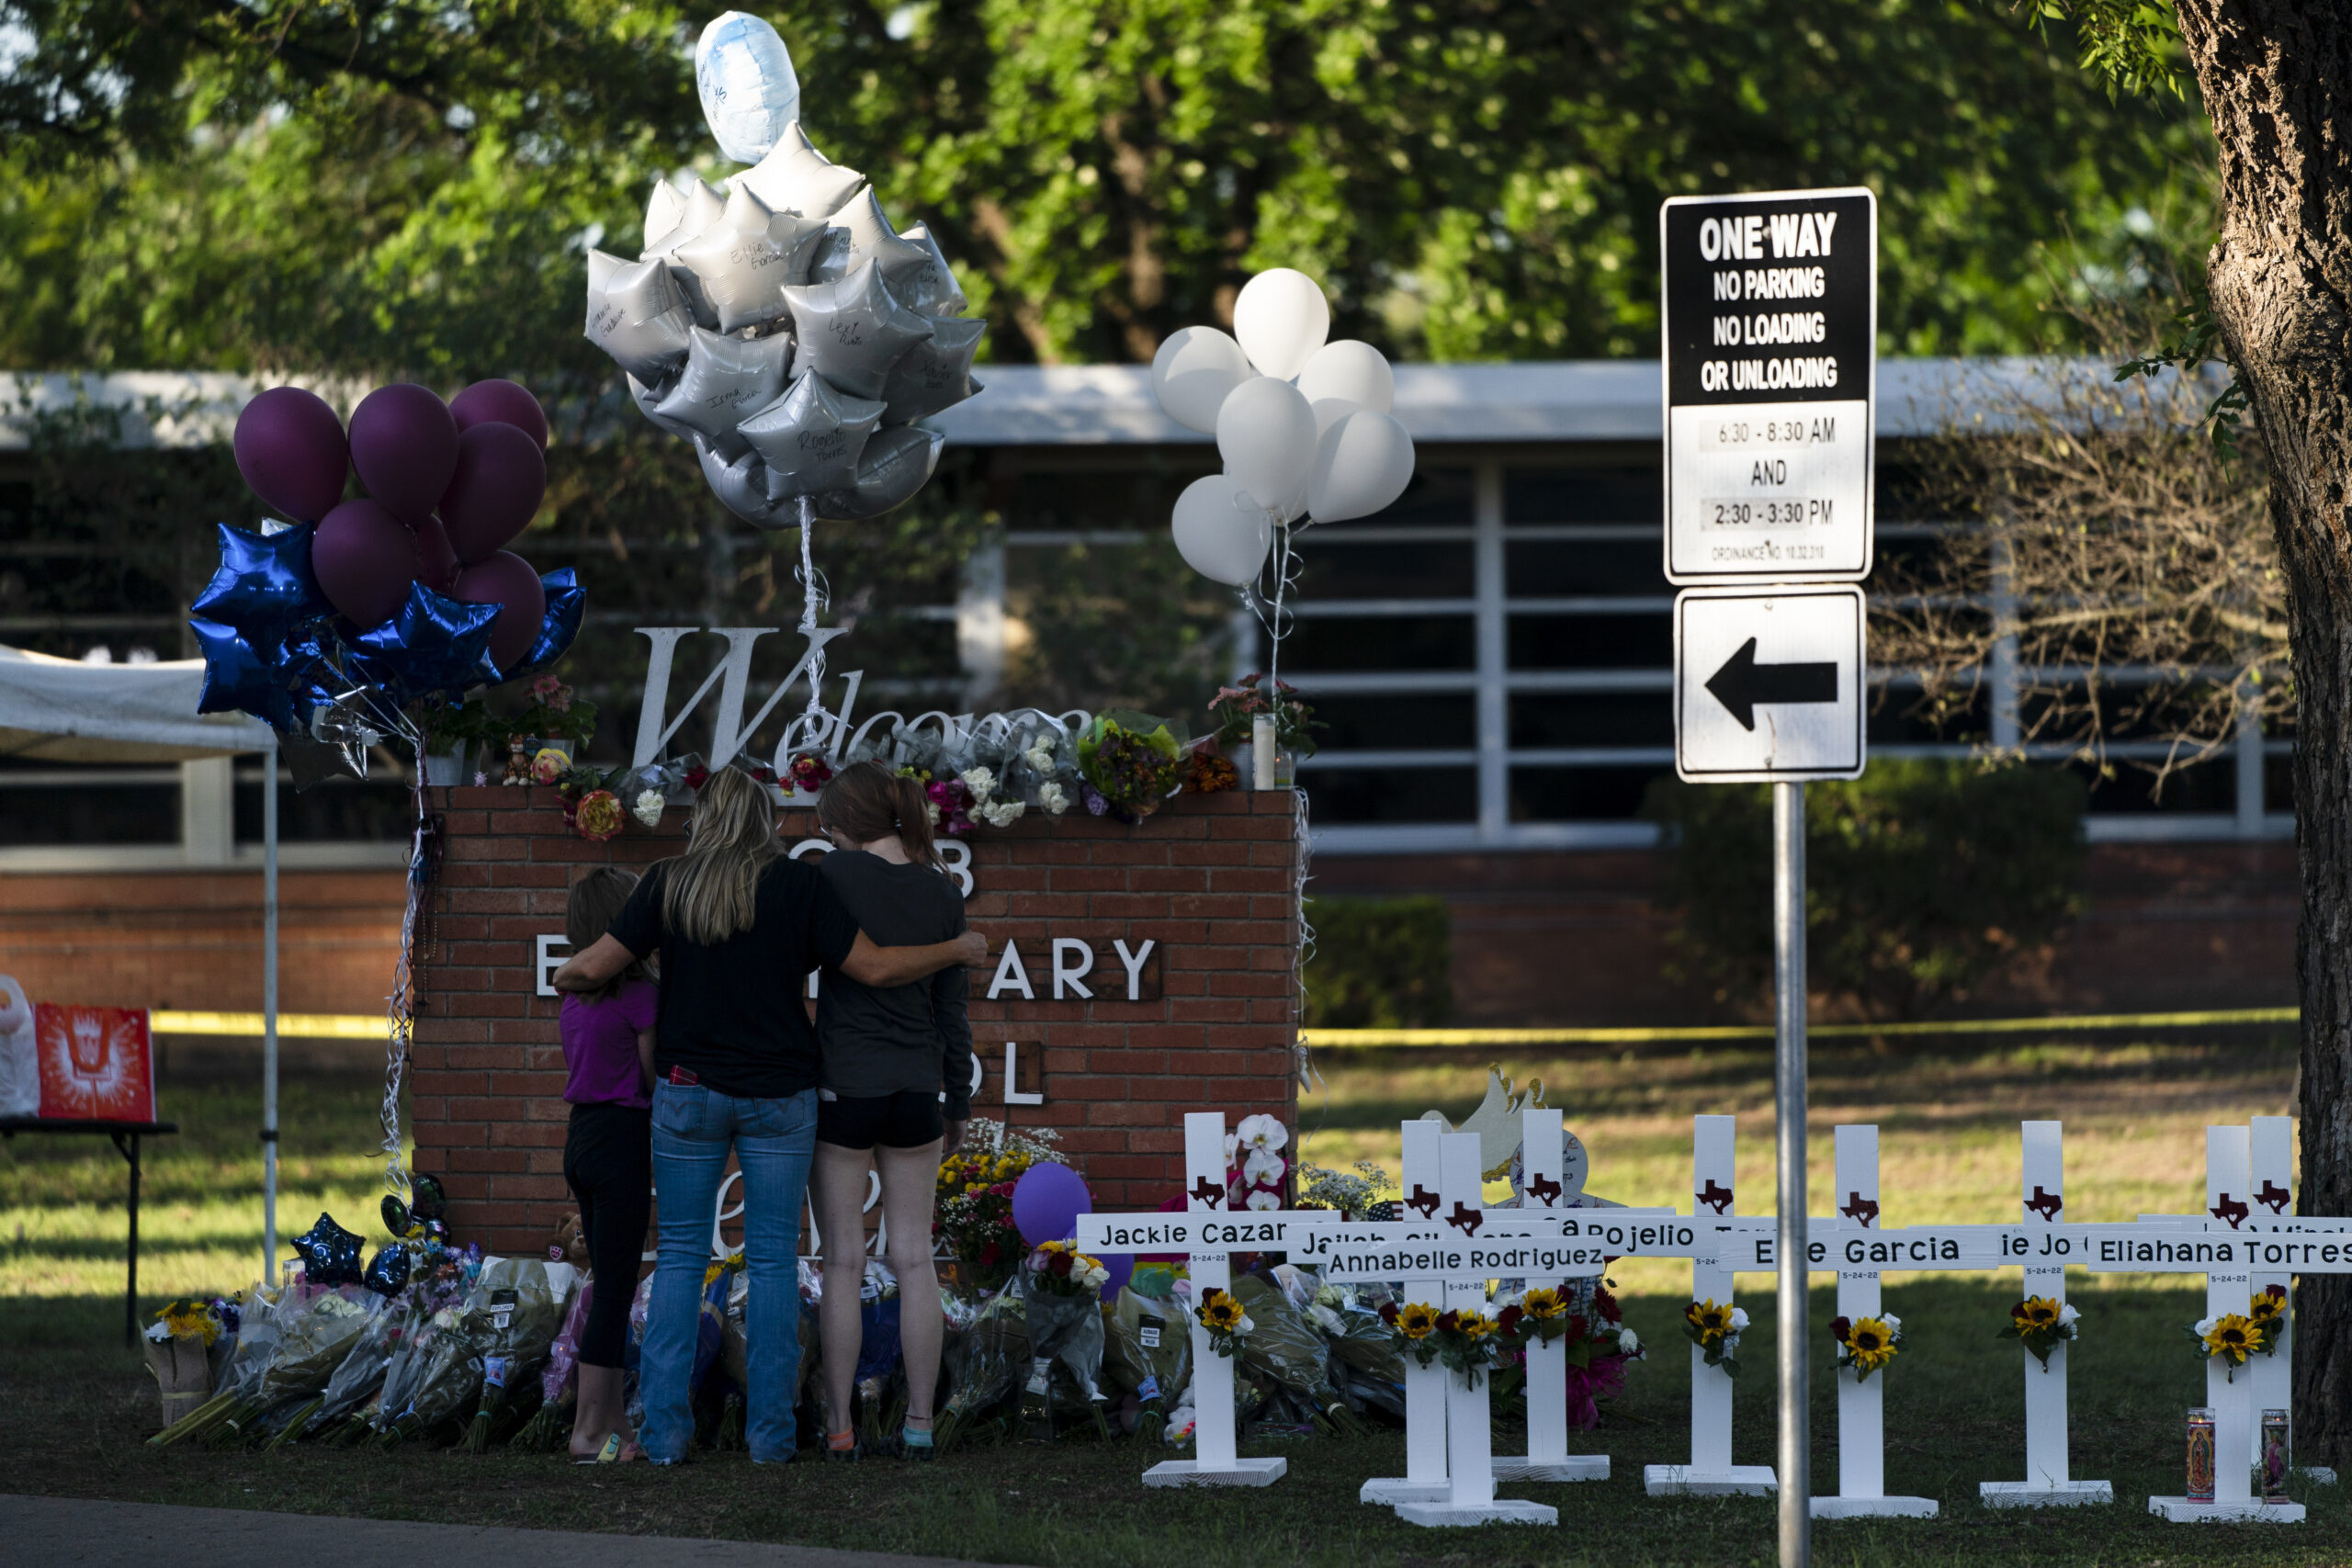 A family pays their respects next to crosses bearing the names of Tuesday's shooting victims at Robb Elementary School in Uvalde, Texas, Thursday, May 26, 2022. (AP Photo/Jae C. Hong)